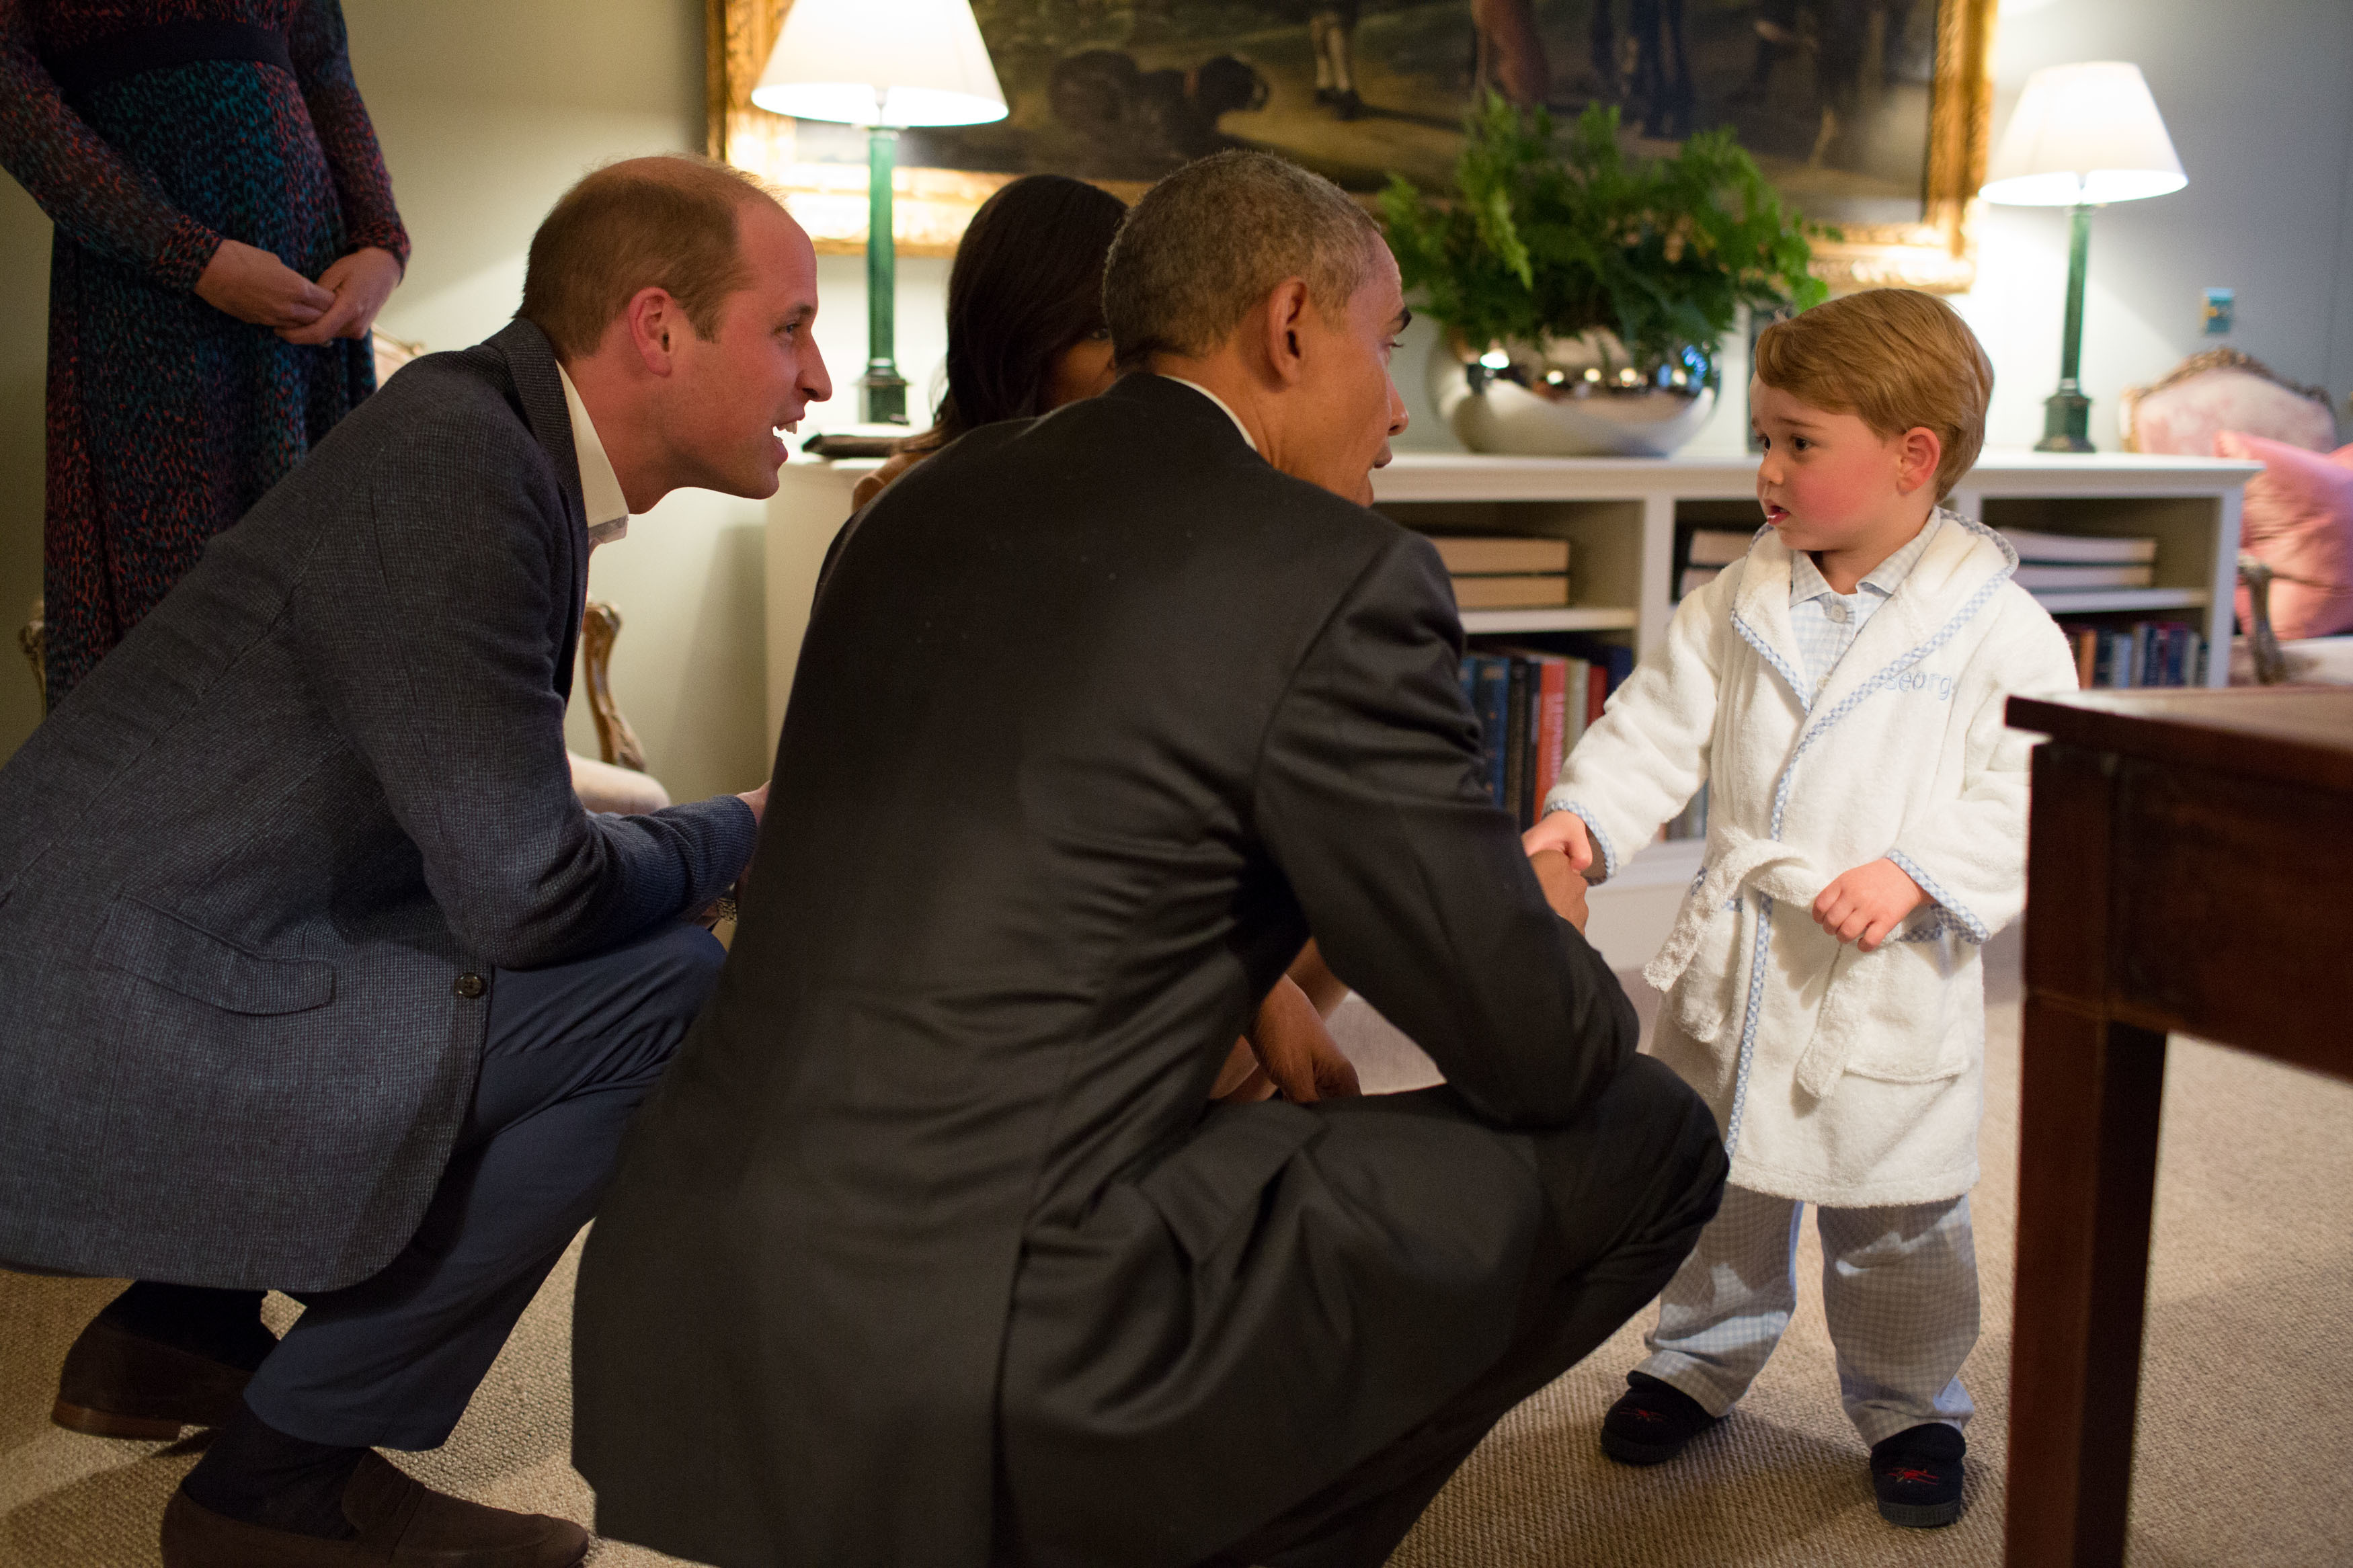 <p>In one of the most iconic images of the modern royals, President Barack Obama and <a href="https://www.wonderwall.com/celebrity/profiles/overview/prince-william-482.article">Prince William</a> had a pre-bedtime talk with Prince George at Kensington Palace in London on April 22, 2016.</p>